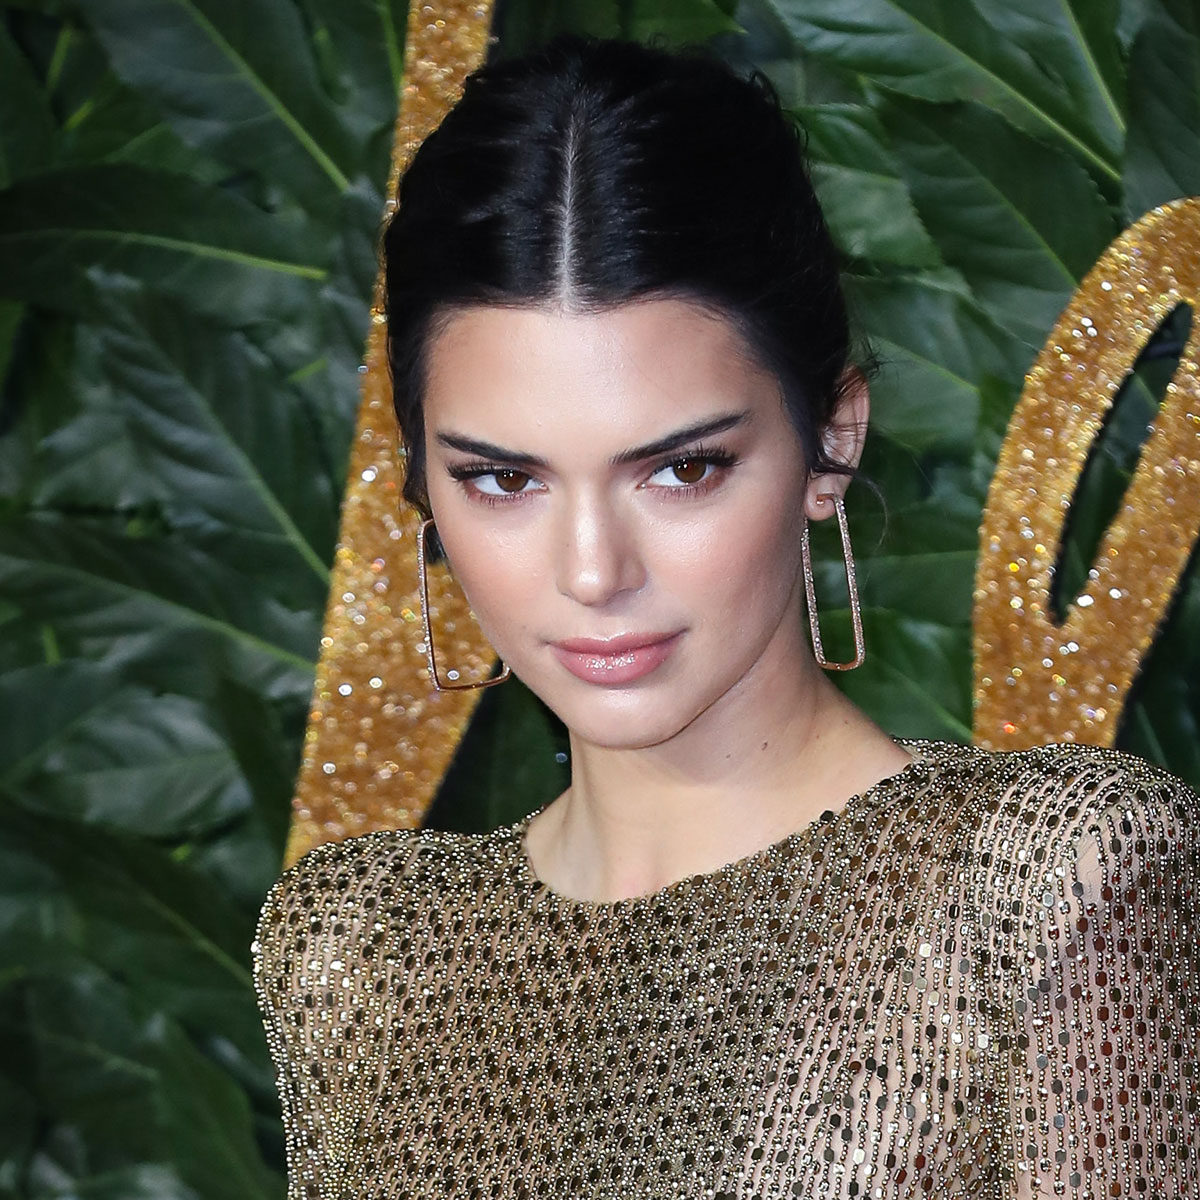 Kendall Jenner's Crop Top, Leather Pants & Printed Heels Are Edgy Chic